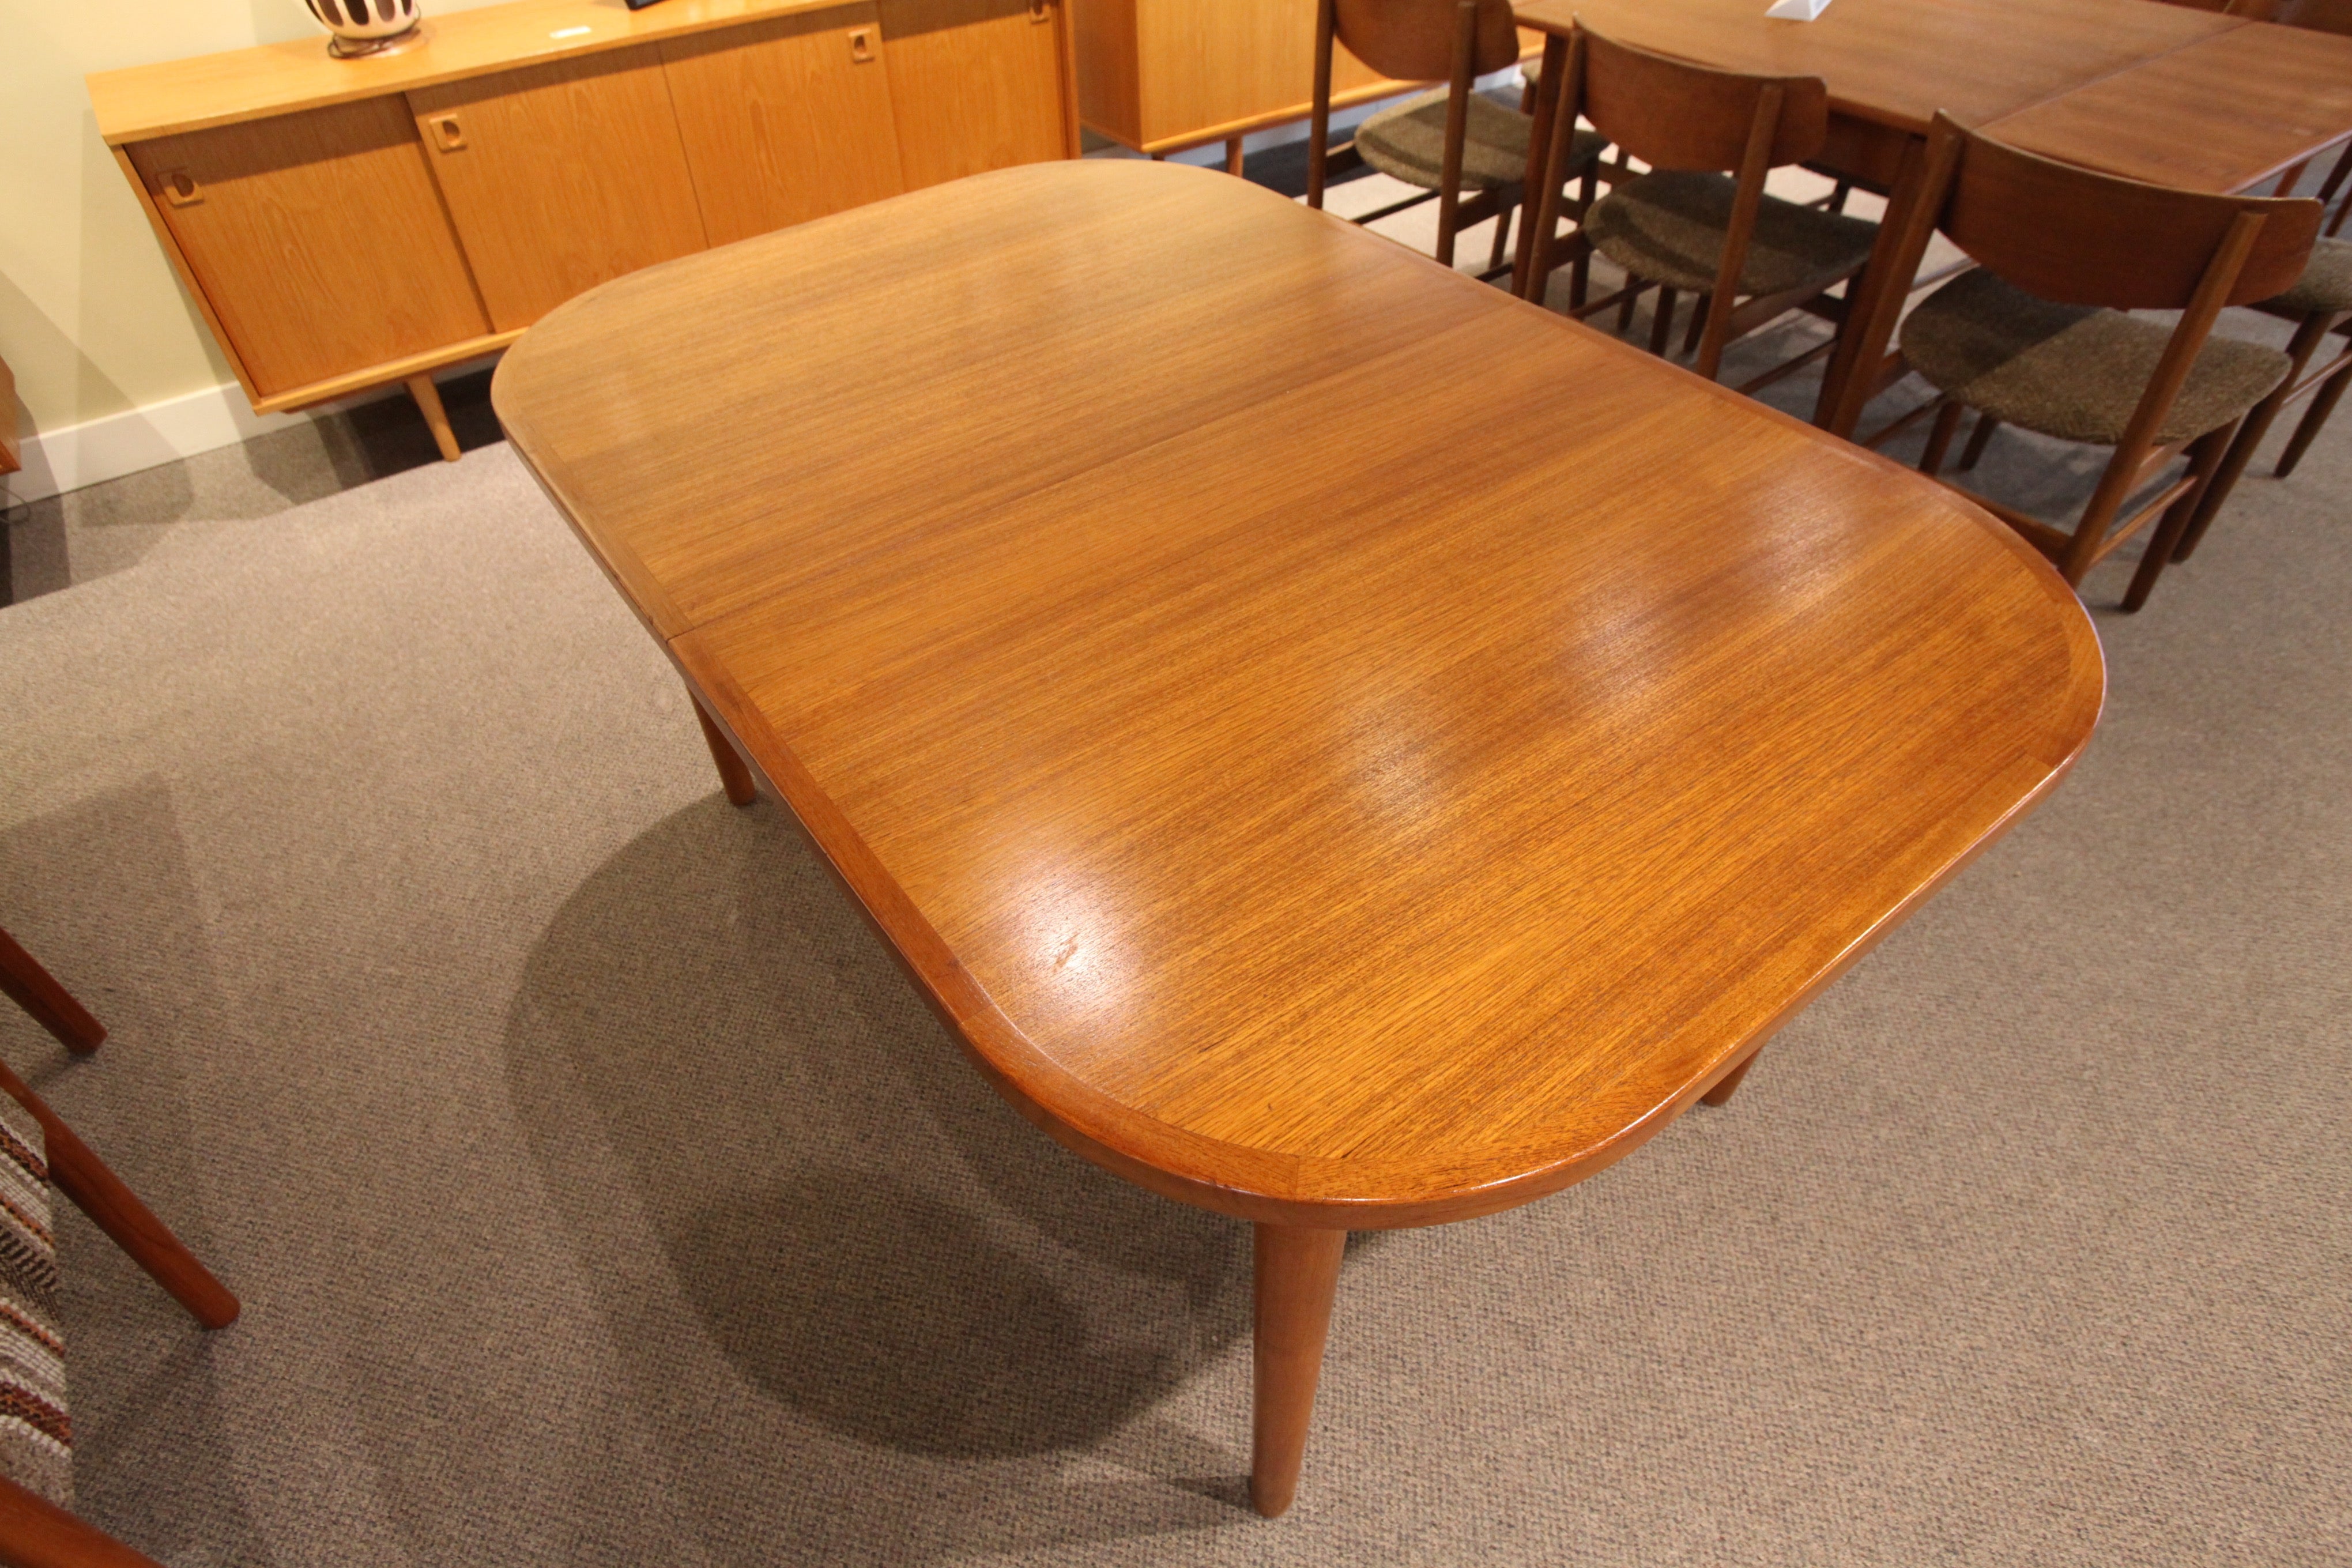 Fabulous Teak Table with Butterfly Leaf (78"L x 38"W) or (57.5"L x 38"W)